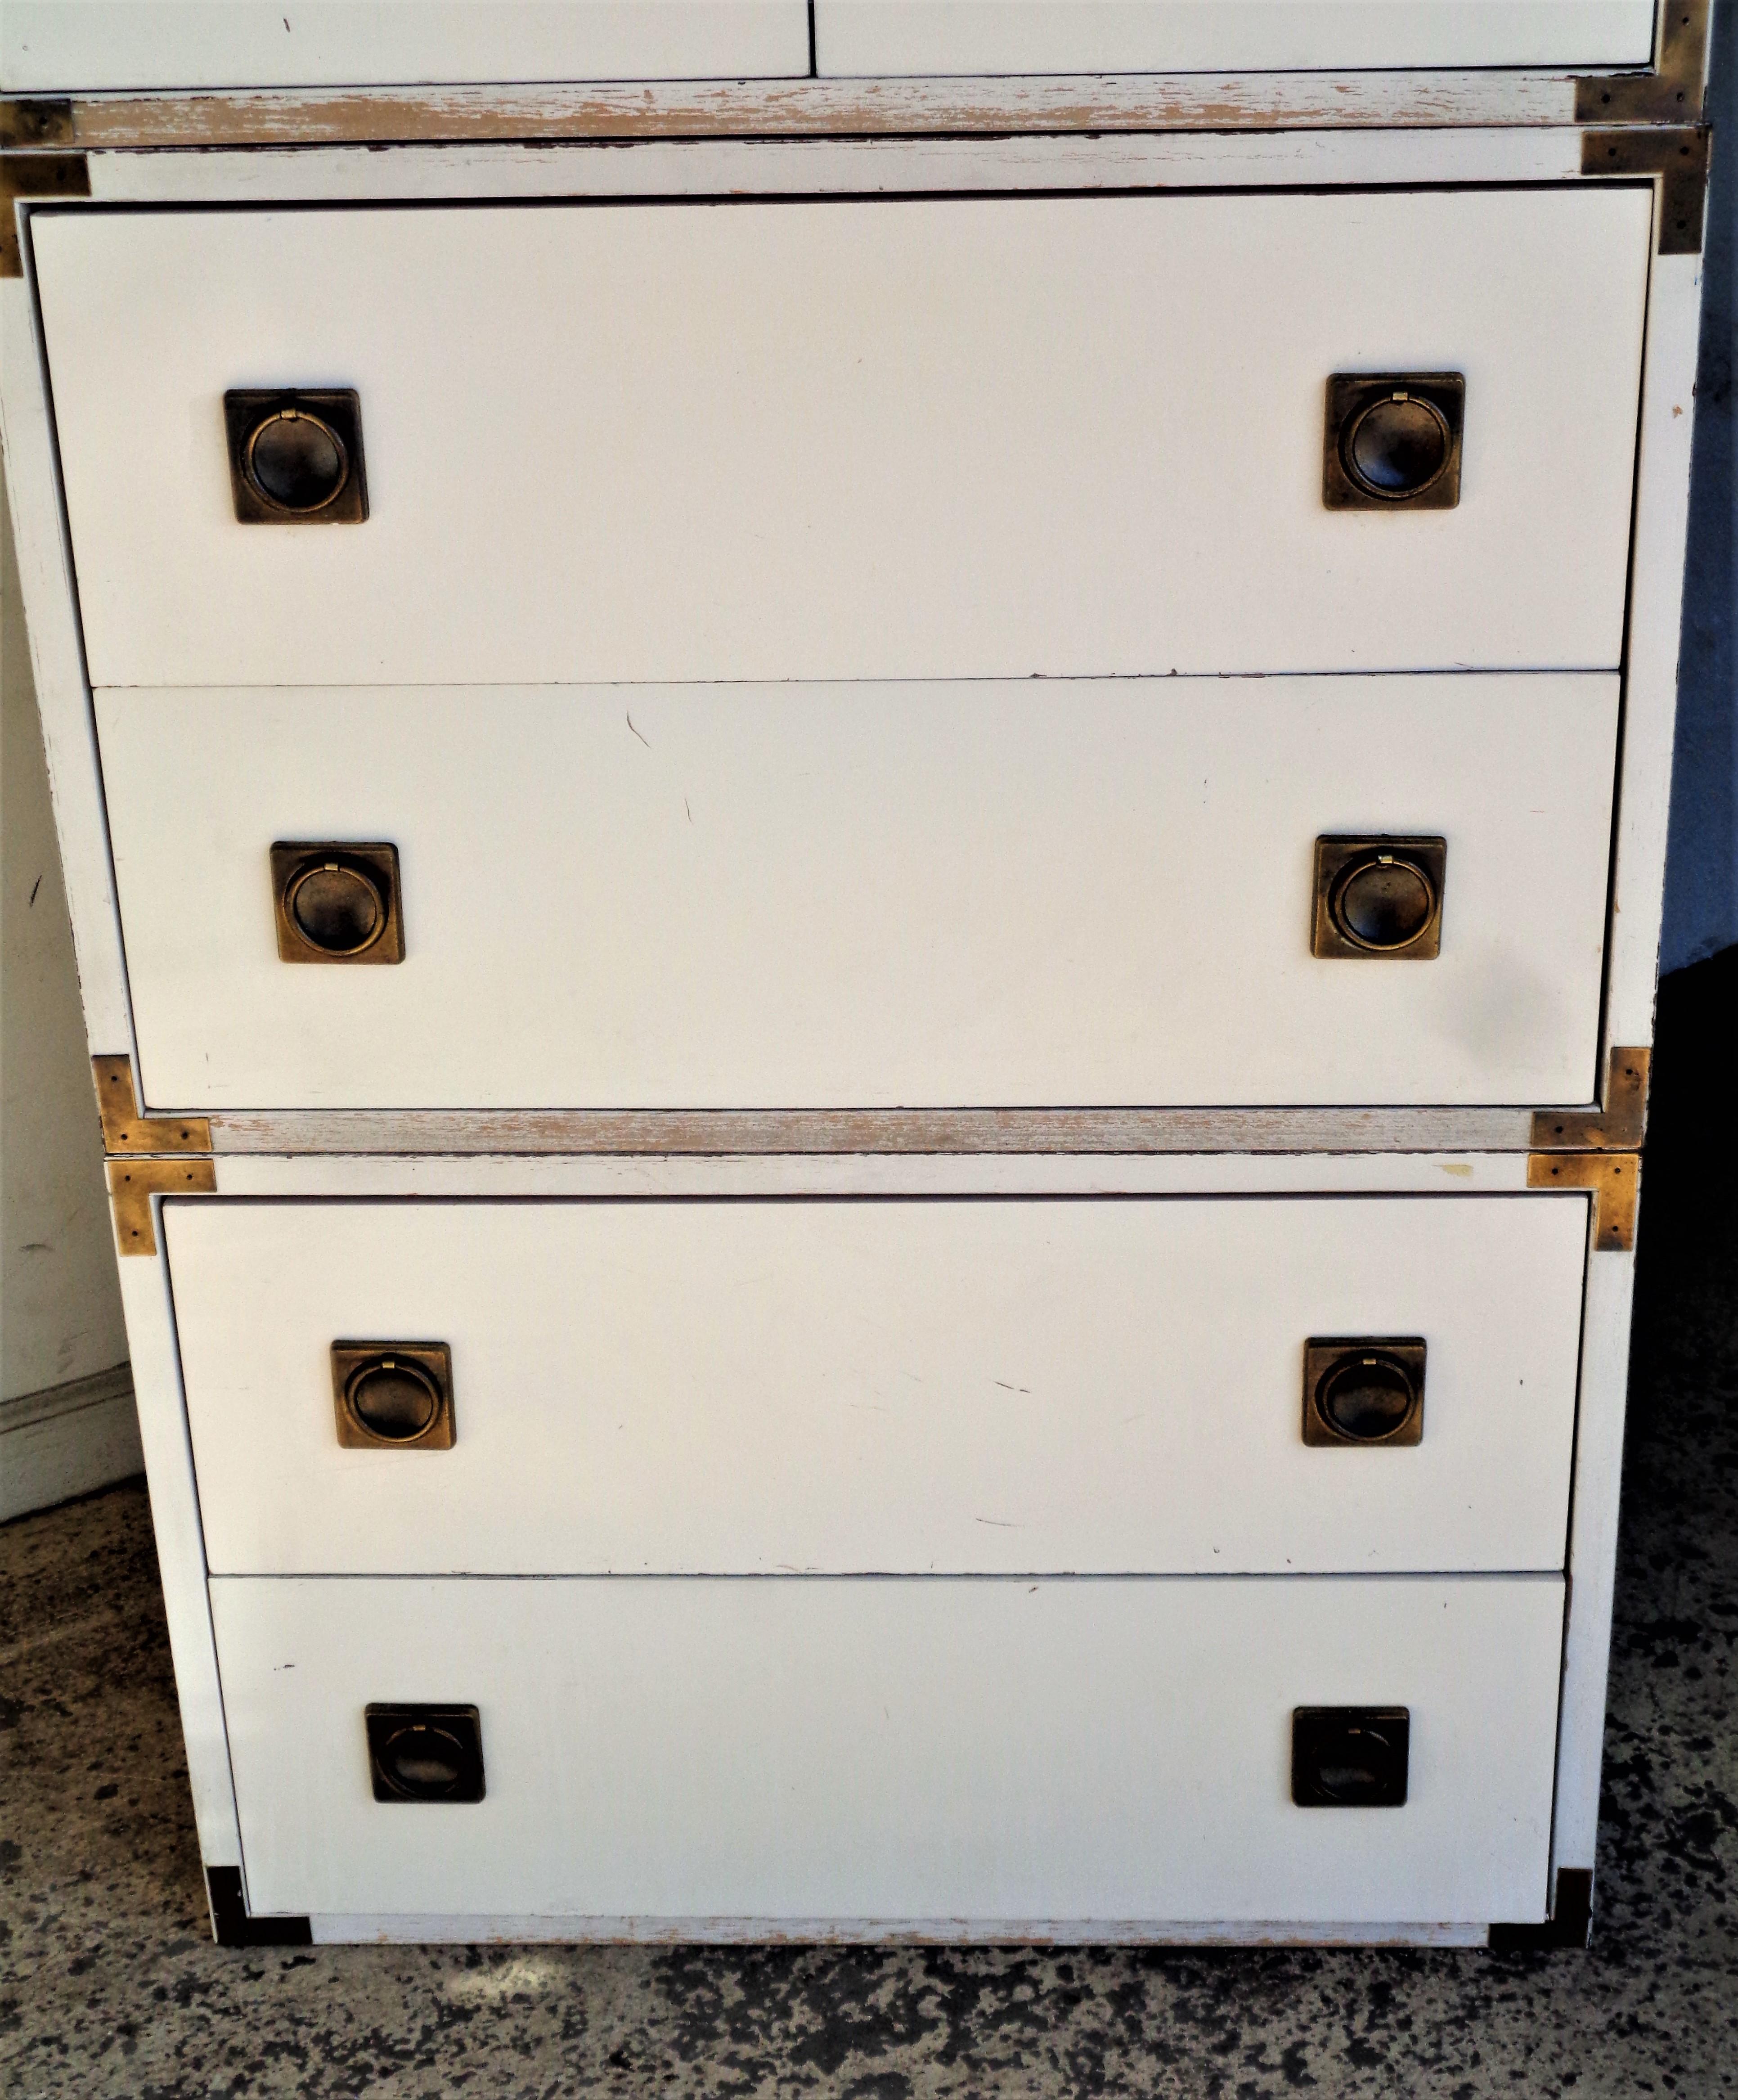 Three tiered campaign style white laminate and wood tall chest with nice brass hardware. As photographed showing two sets of stacking lower double drawers at bottom and a stacking two door cabinet with open interior at top. All sections are the same